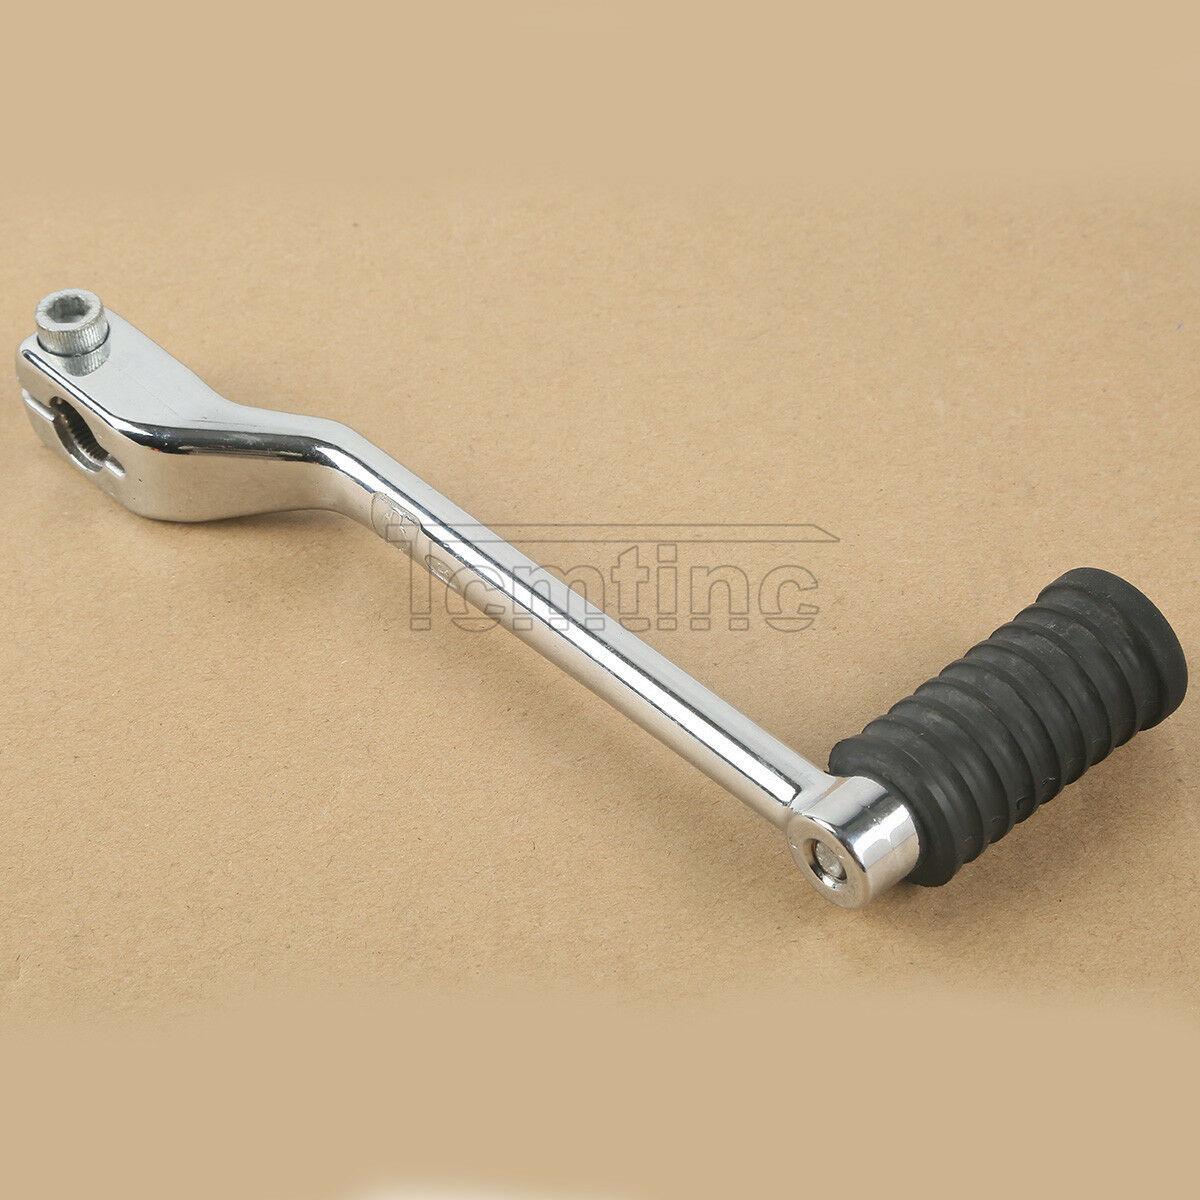 Gear Shift Shifter Lever Pedal For Harley Touring Electra Glide Softail FL Trike - Moto Life Products